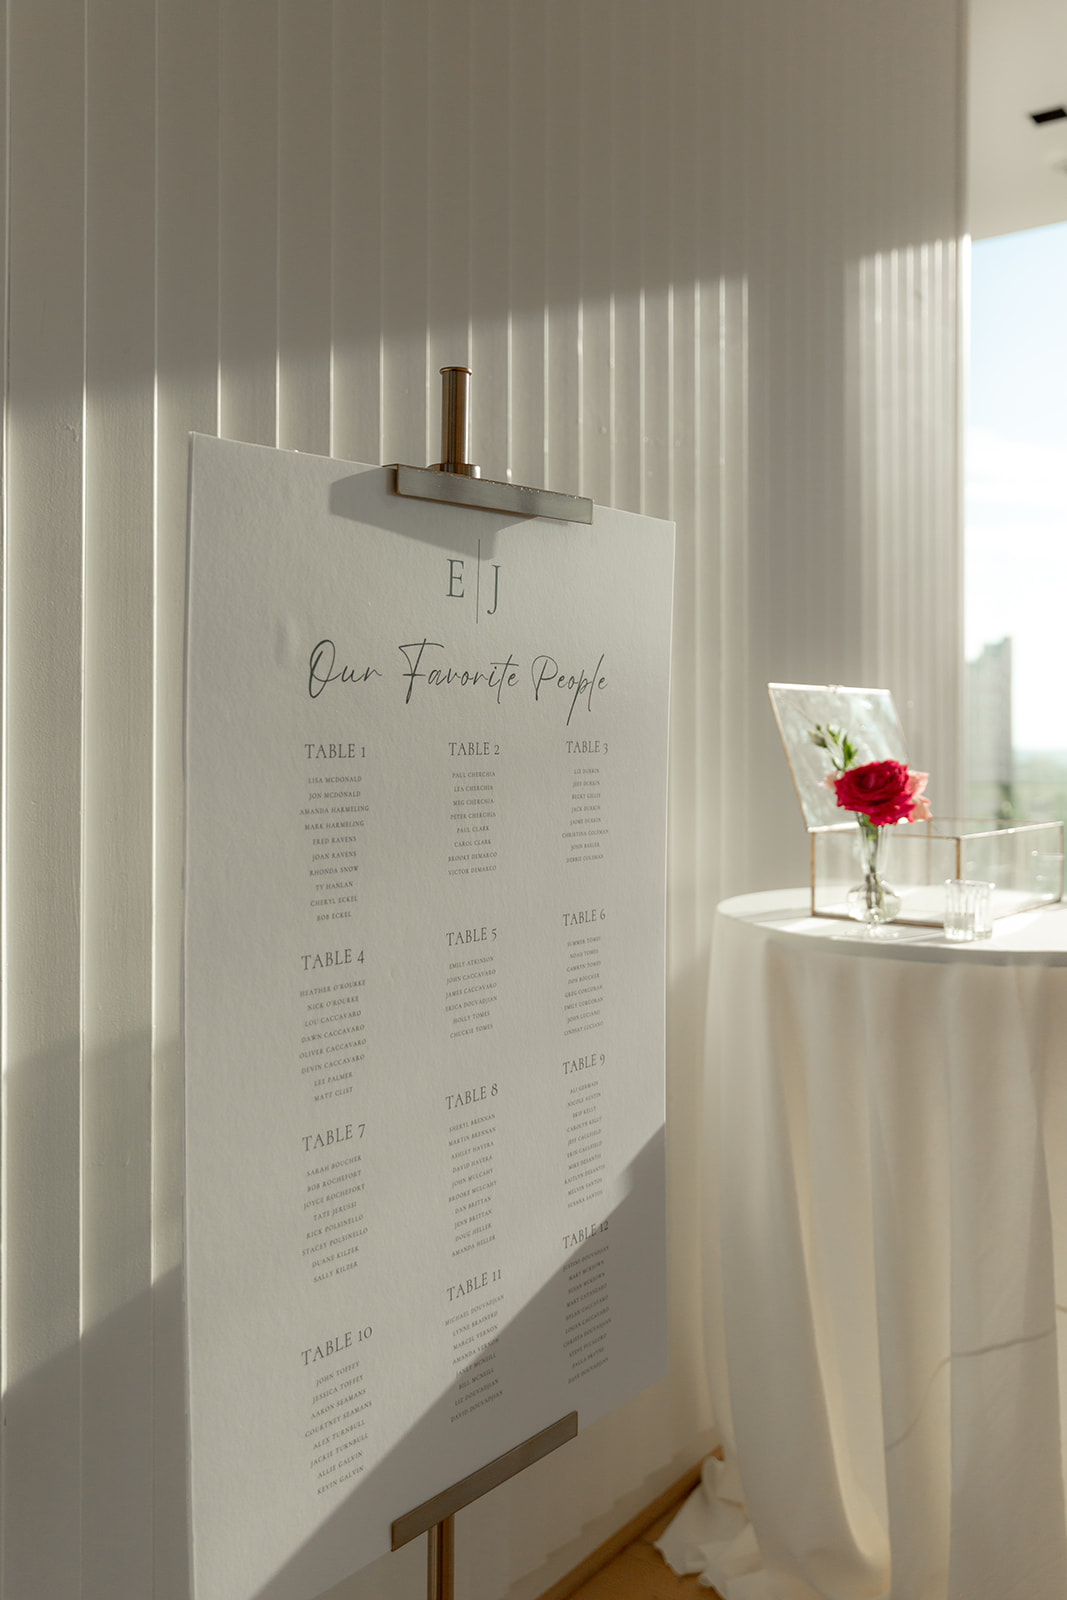 Sunbeams hit seating chart for Wedding at The Dewberry Charleston